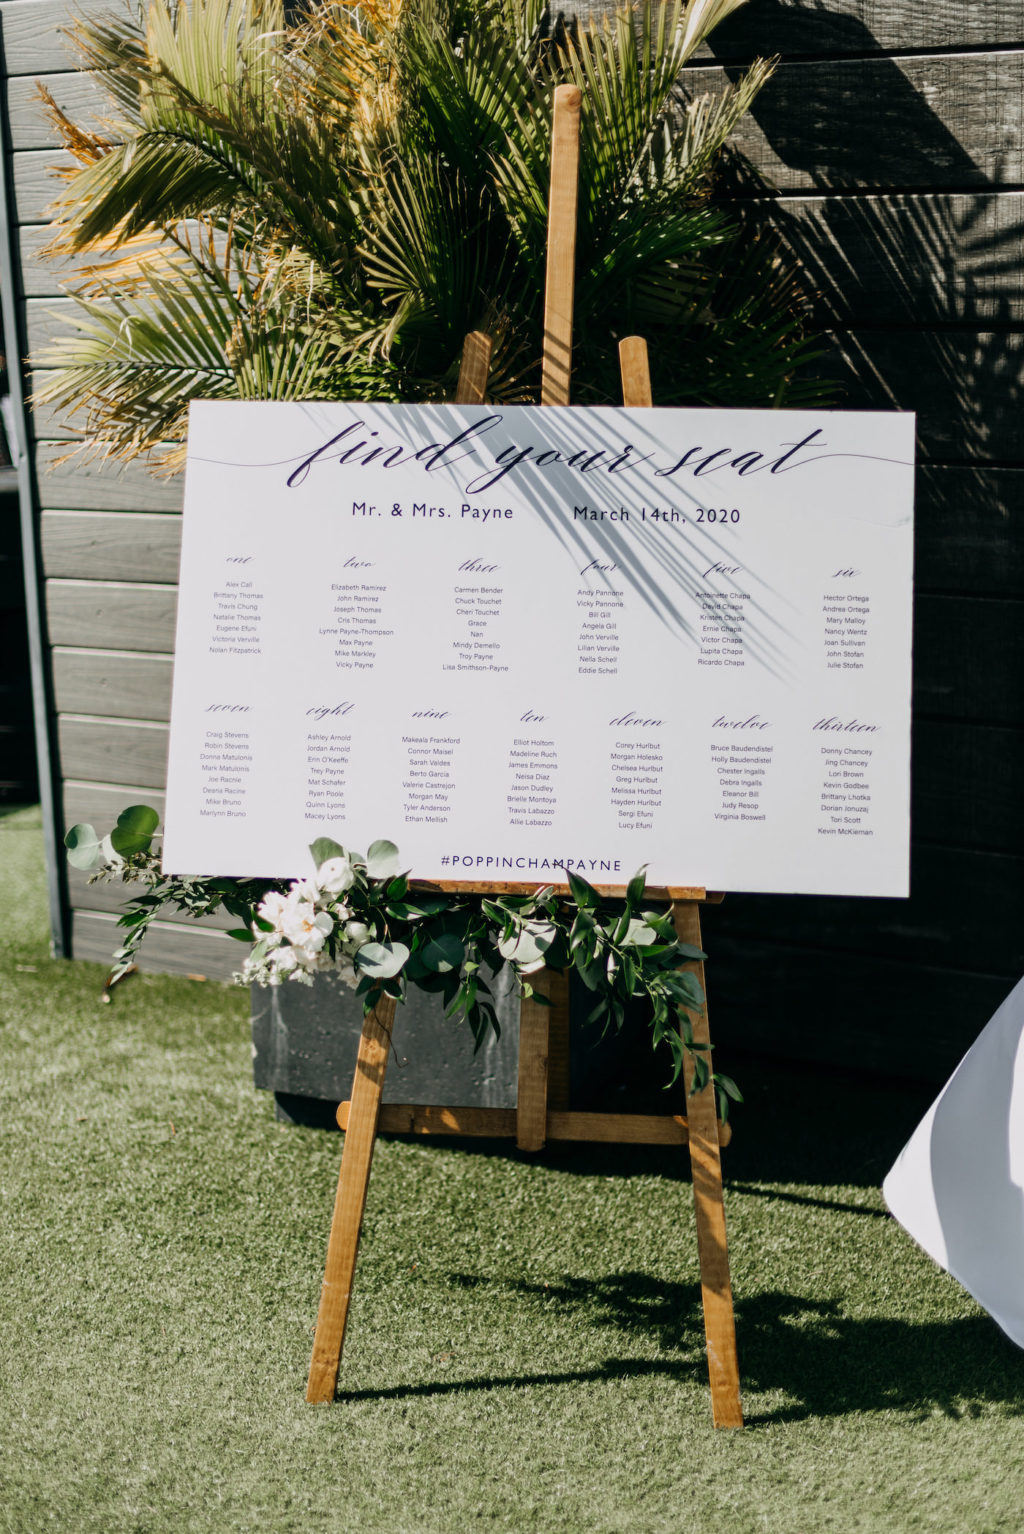 Classic Elegant Wedding Reception Decor, Wooden Easel with White Seating Chart and Greenery Garland and Ivory Flowers | St. Pete Wedding Venue Hotel Zamora | Wedding Planner Blue Skies Weddings and Events